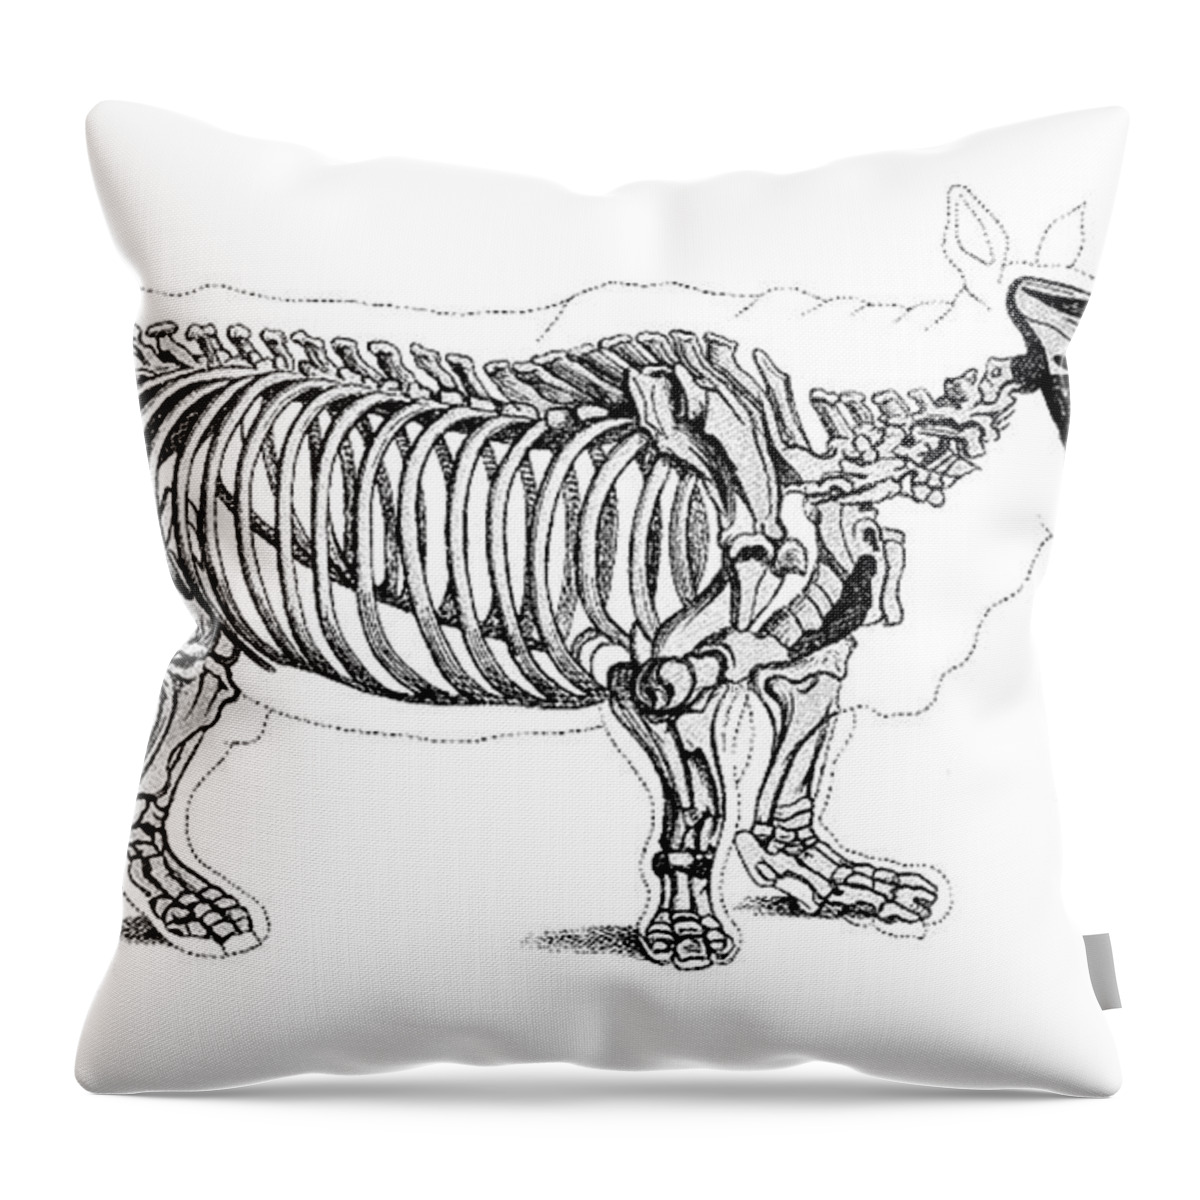 Prehistory Throw Pillow featuring the photograph Rhinoceros, Extant Cenozoic Mammal by Science Source